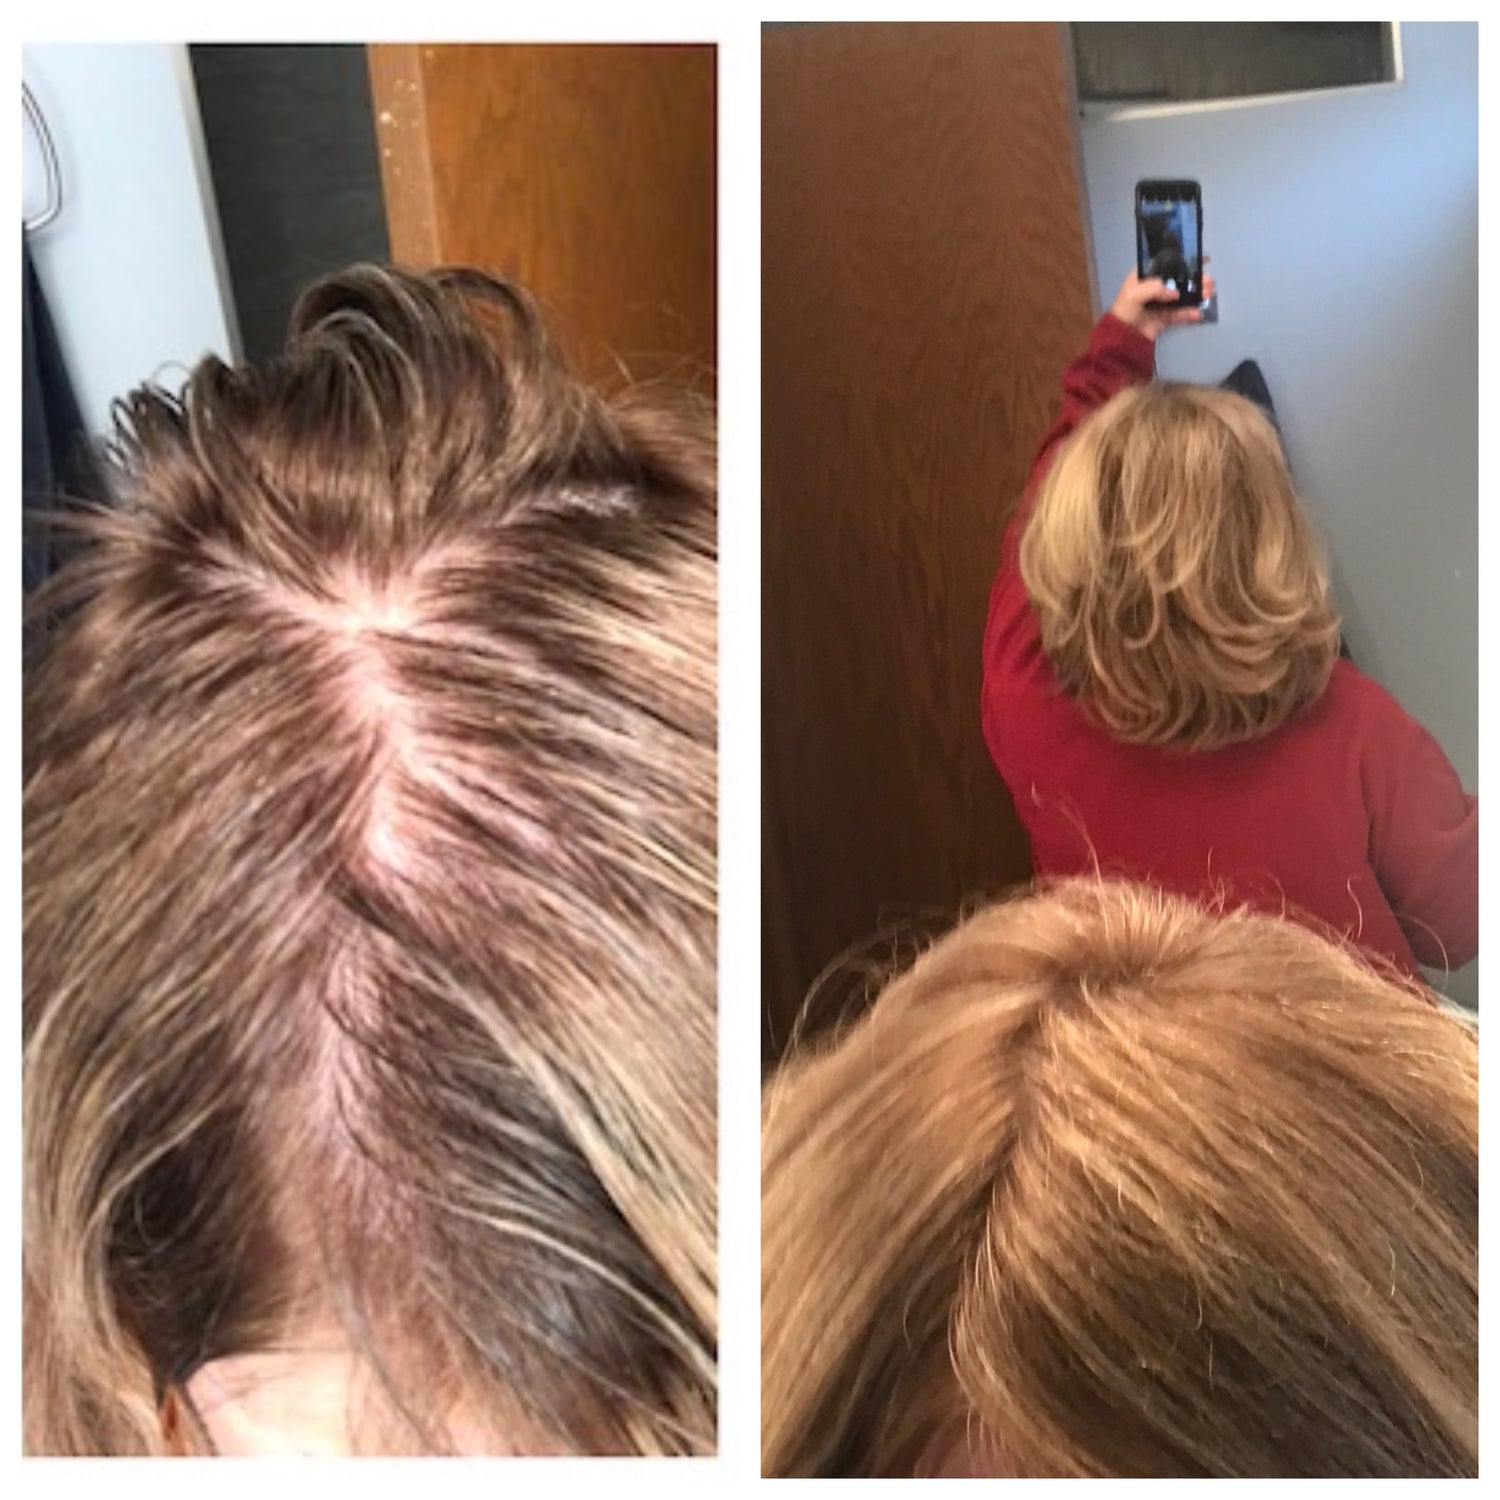 Covid hair loss, Covid hair loss treatment, adaptogenic mushrooms, hair serum, before and after pictures